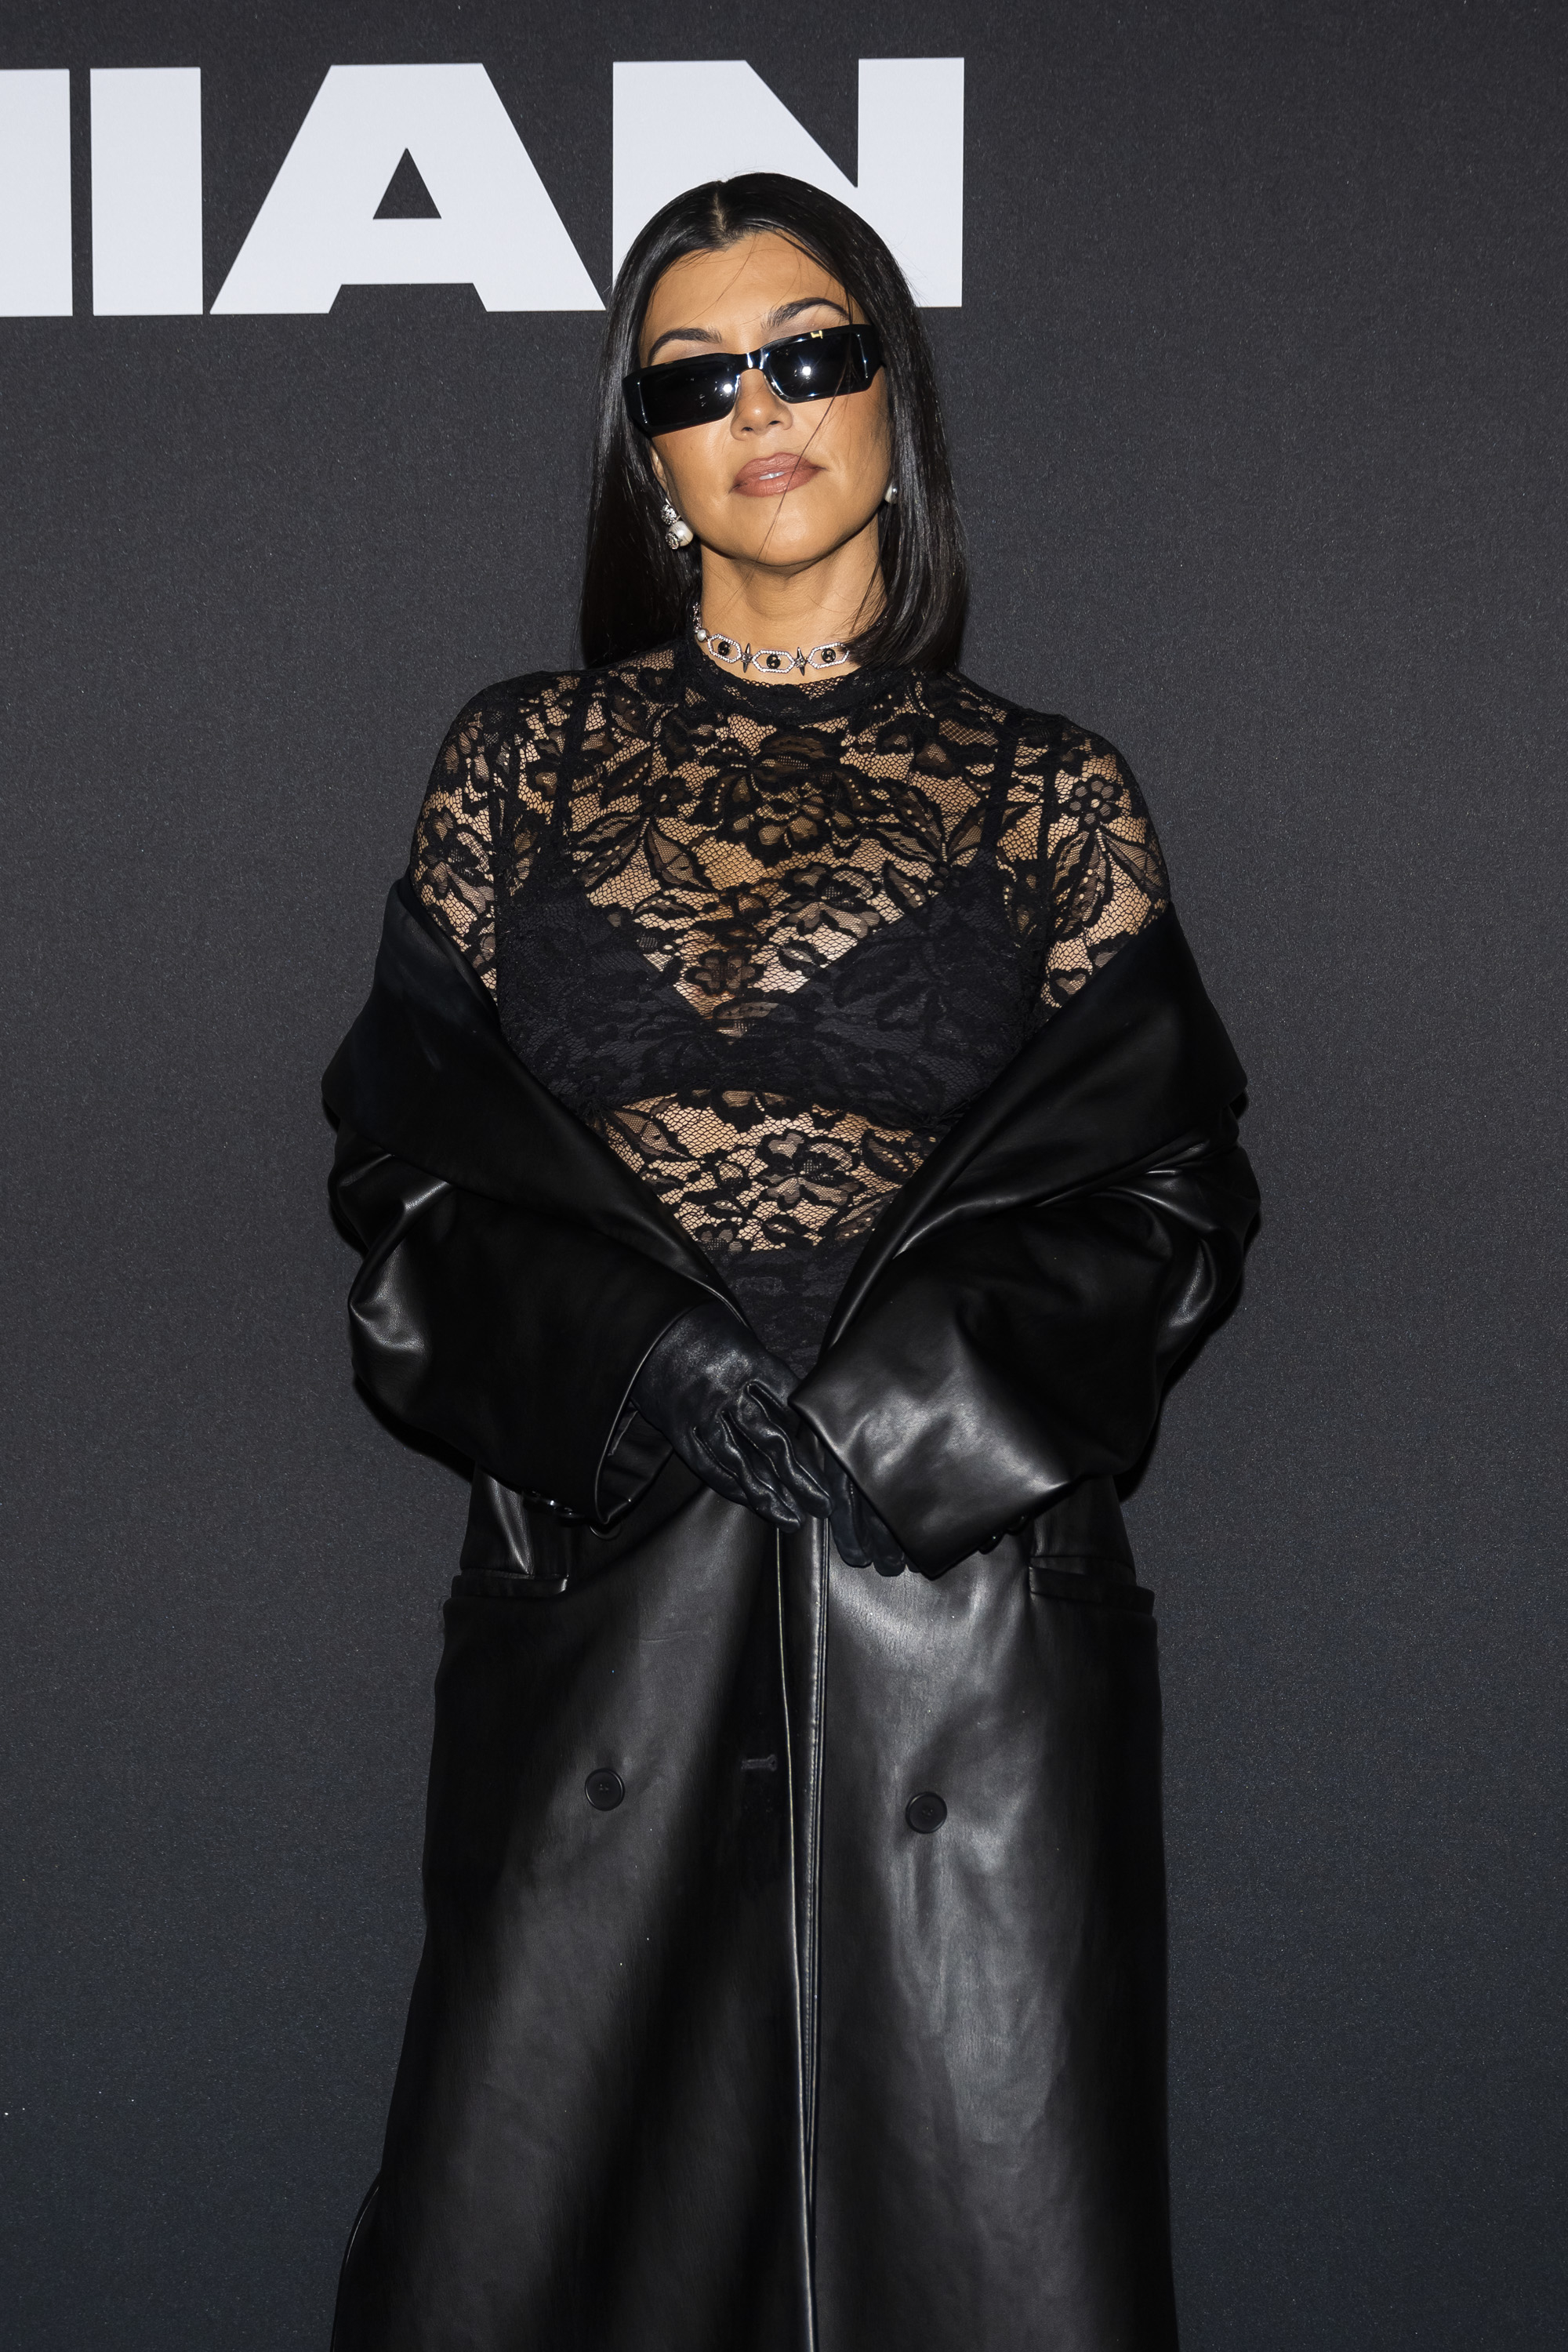 Kourtney Kardashian at an event in a lace top with a bra underneath, leather gloves, and a long leather coat, posing against a dark background